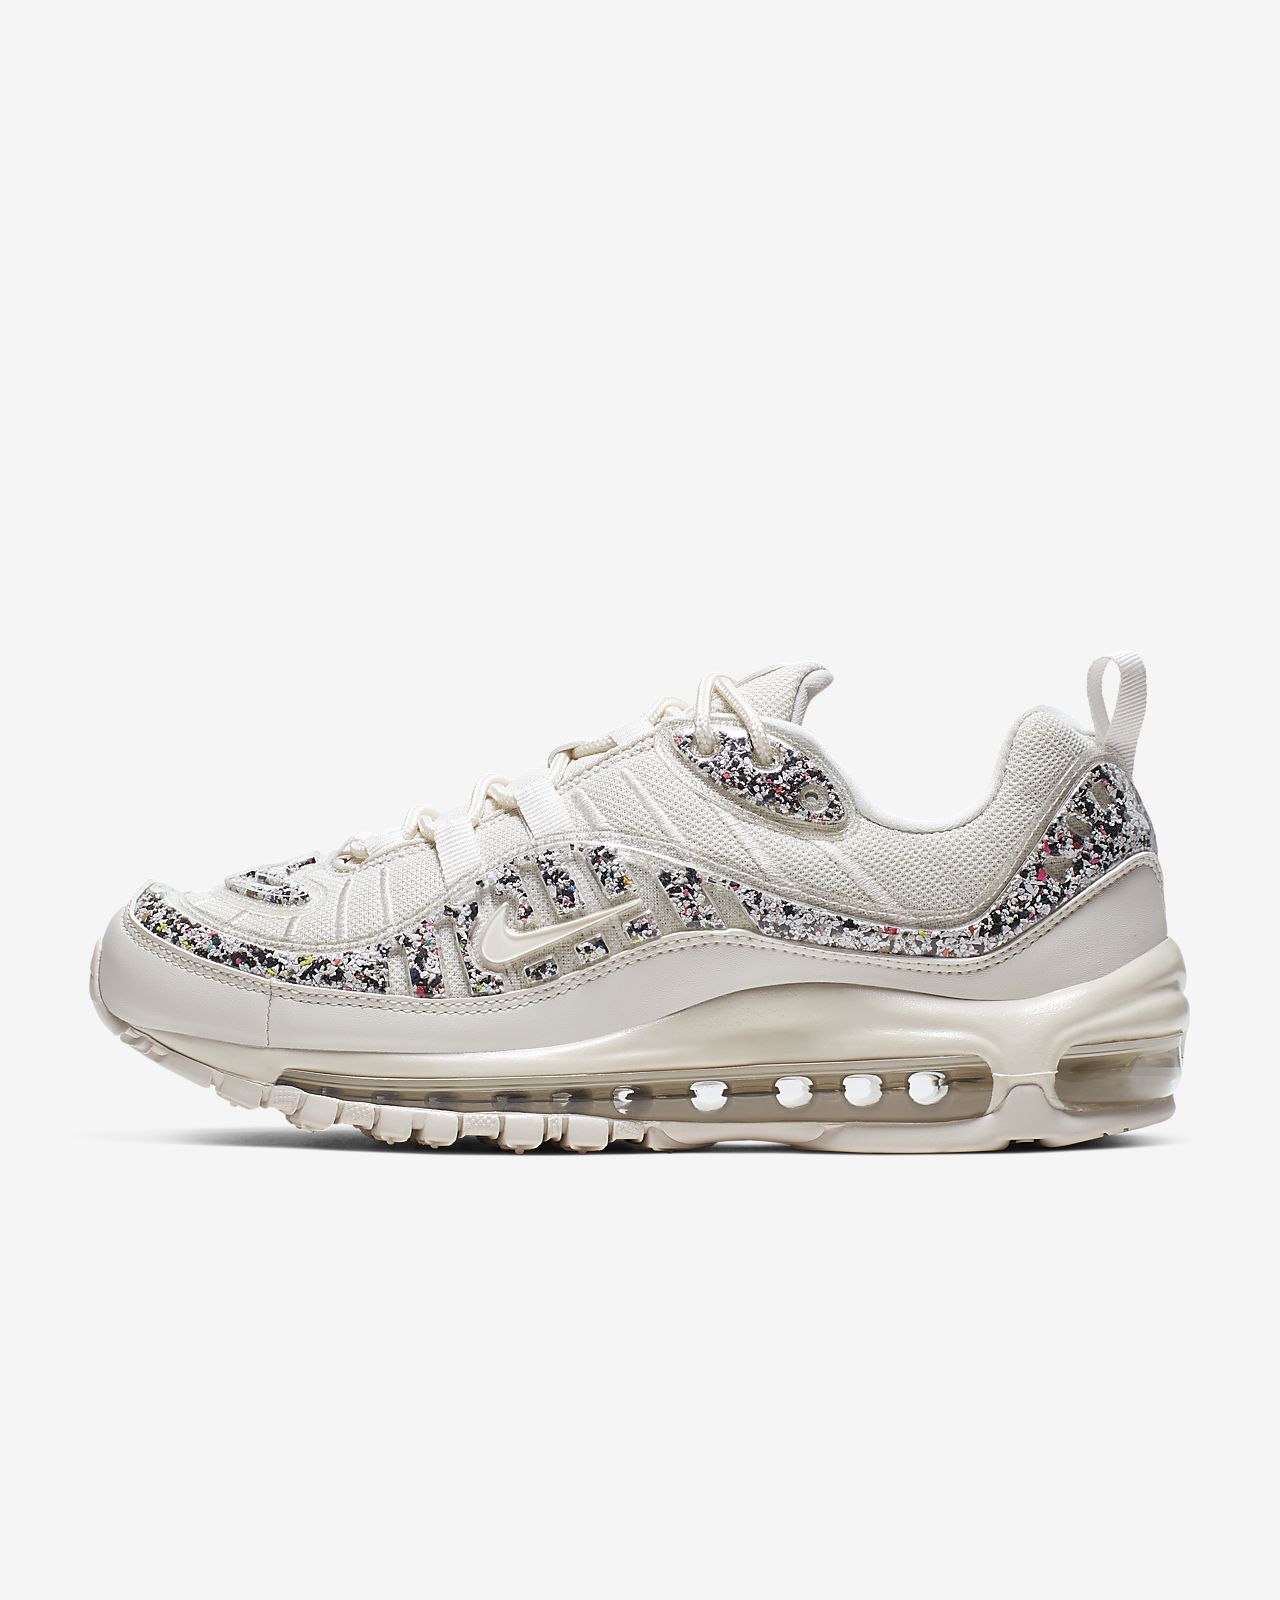 nike air max 98 exclusive Shop Clothing 